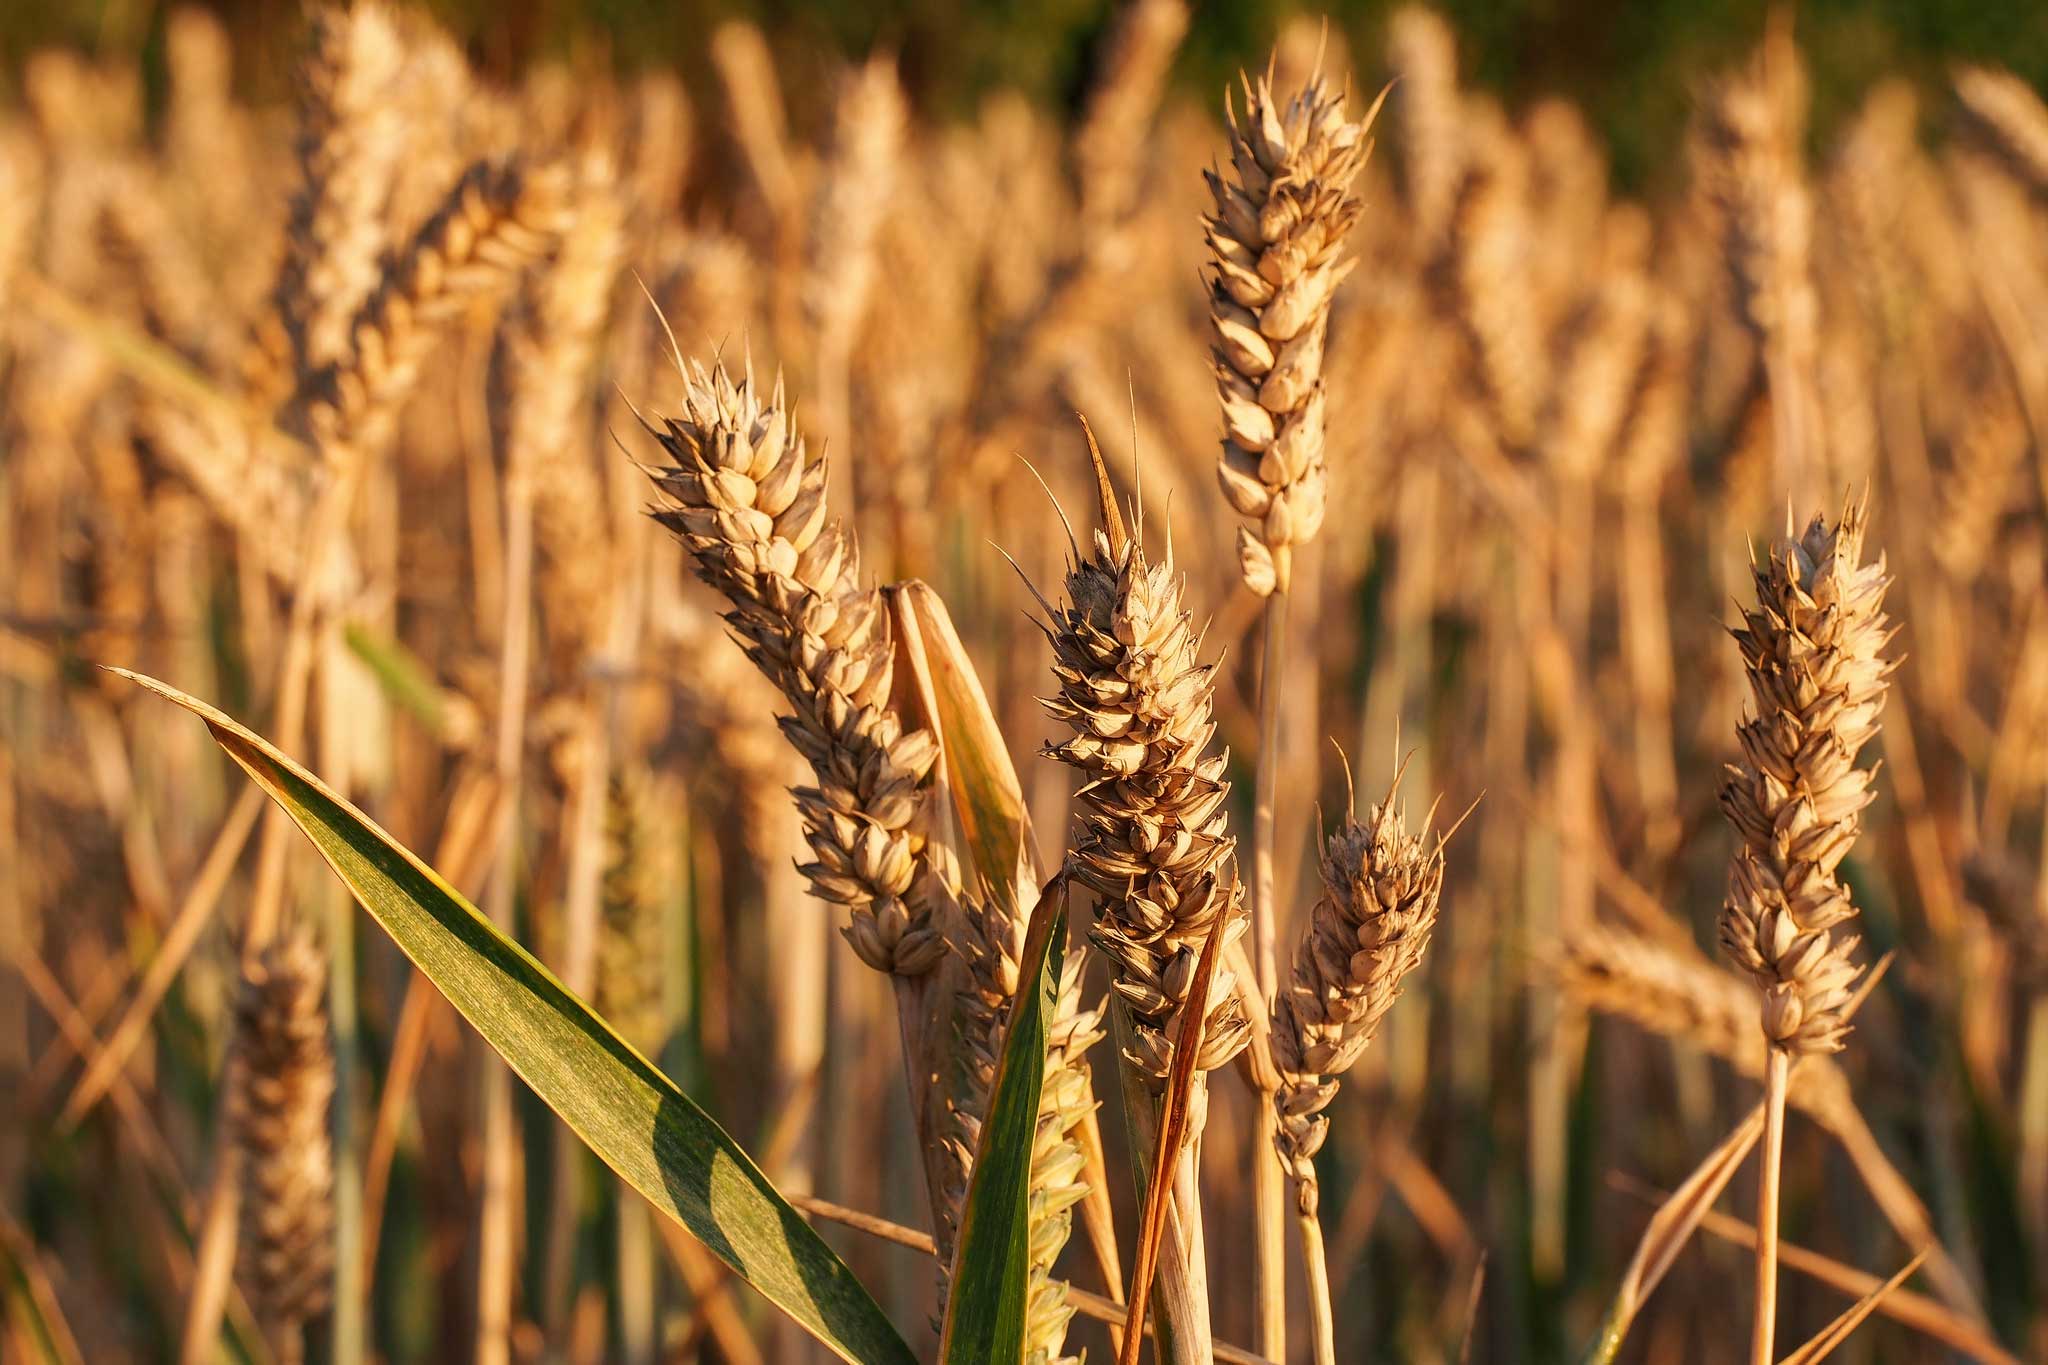 Winter Wheat | A Moment of Science - Indiana Public Media